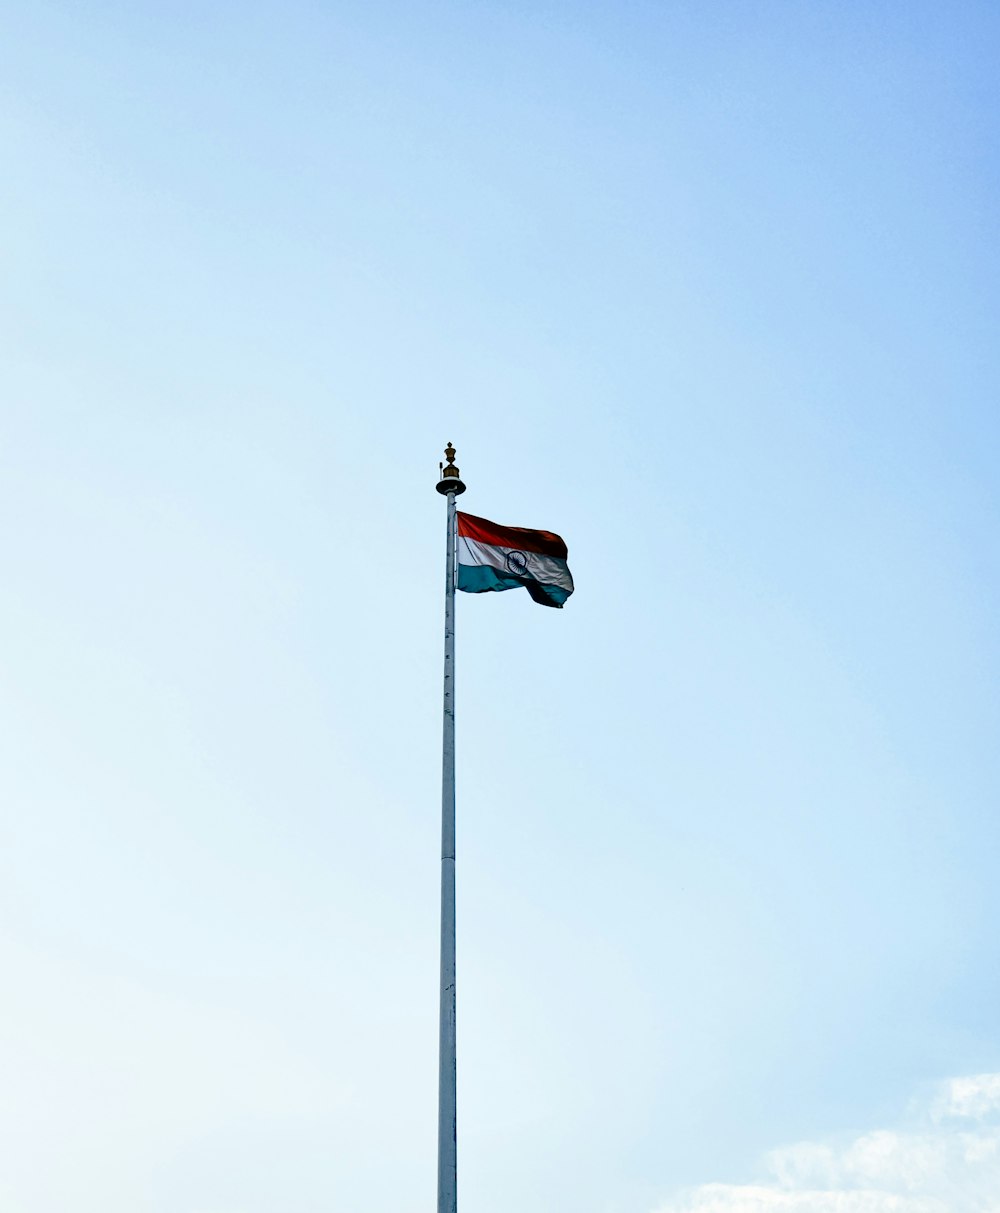 a tall flag pole with a flag on top of it